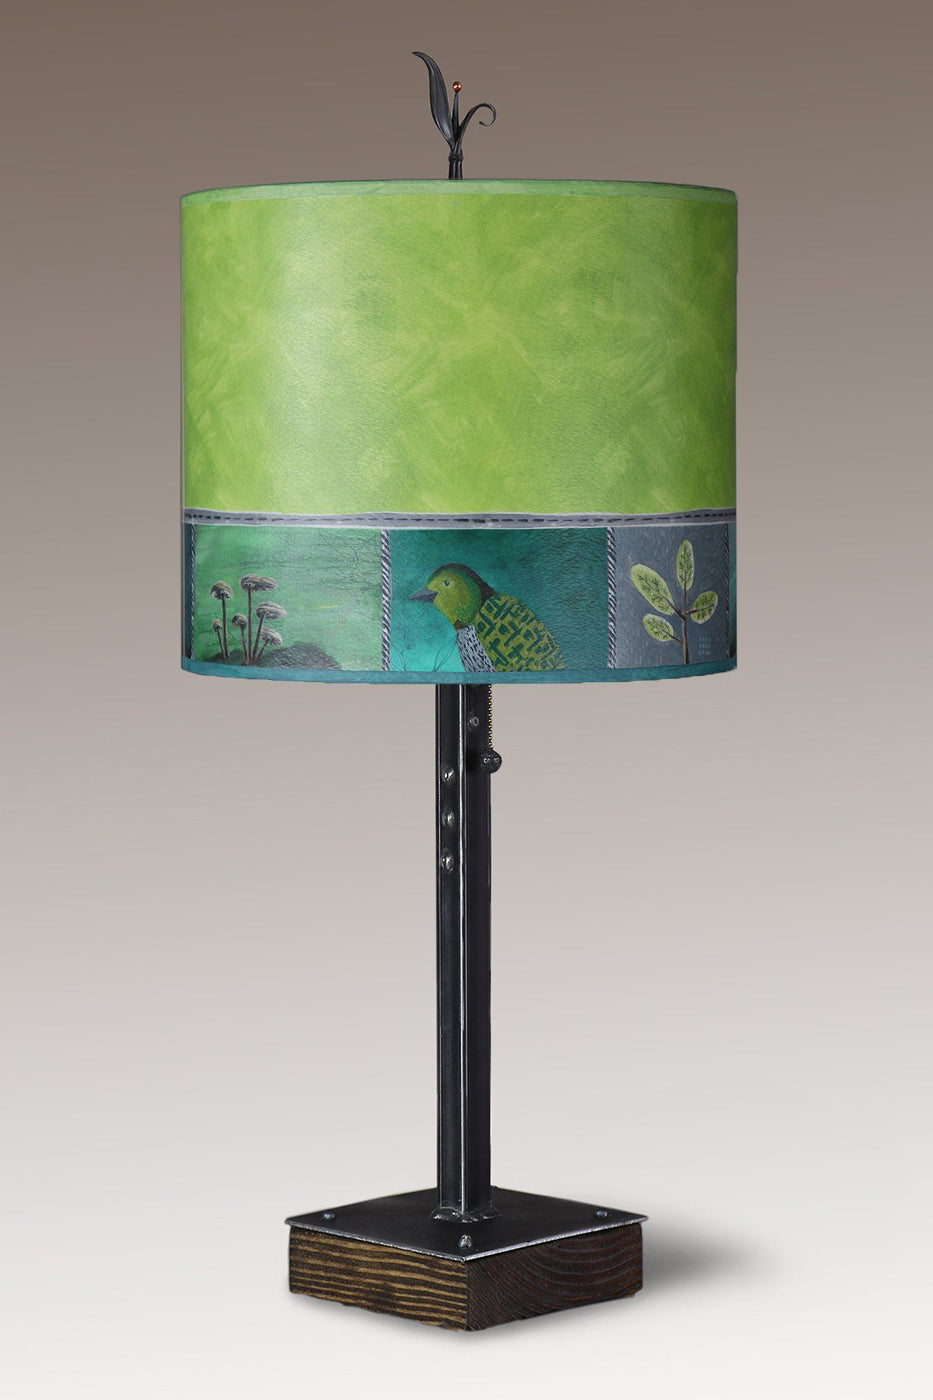 Steel Table Lamp on Wood with Large Oval Shade in Woodland Trails in Leaf